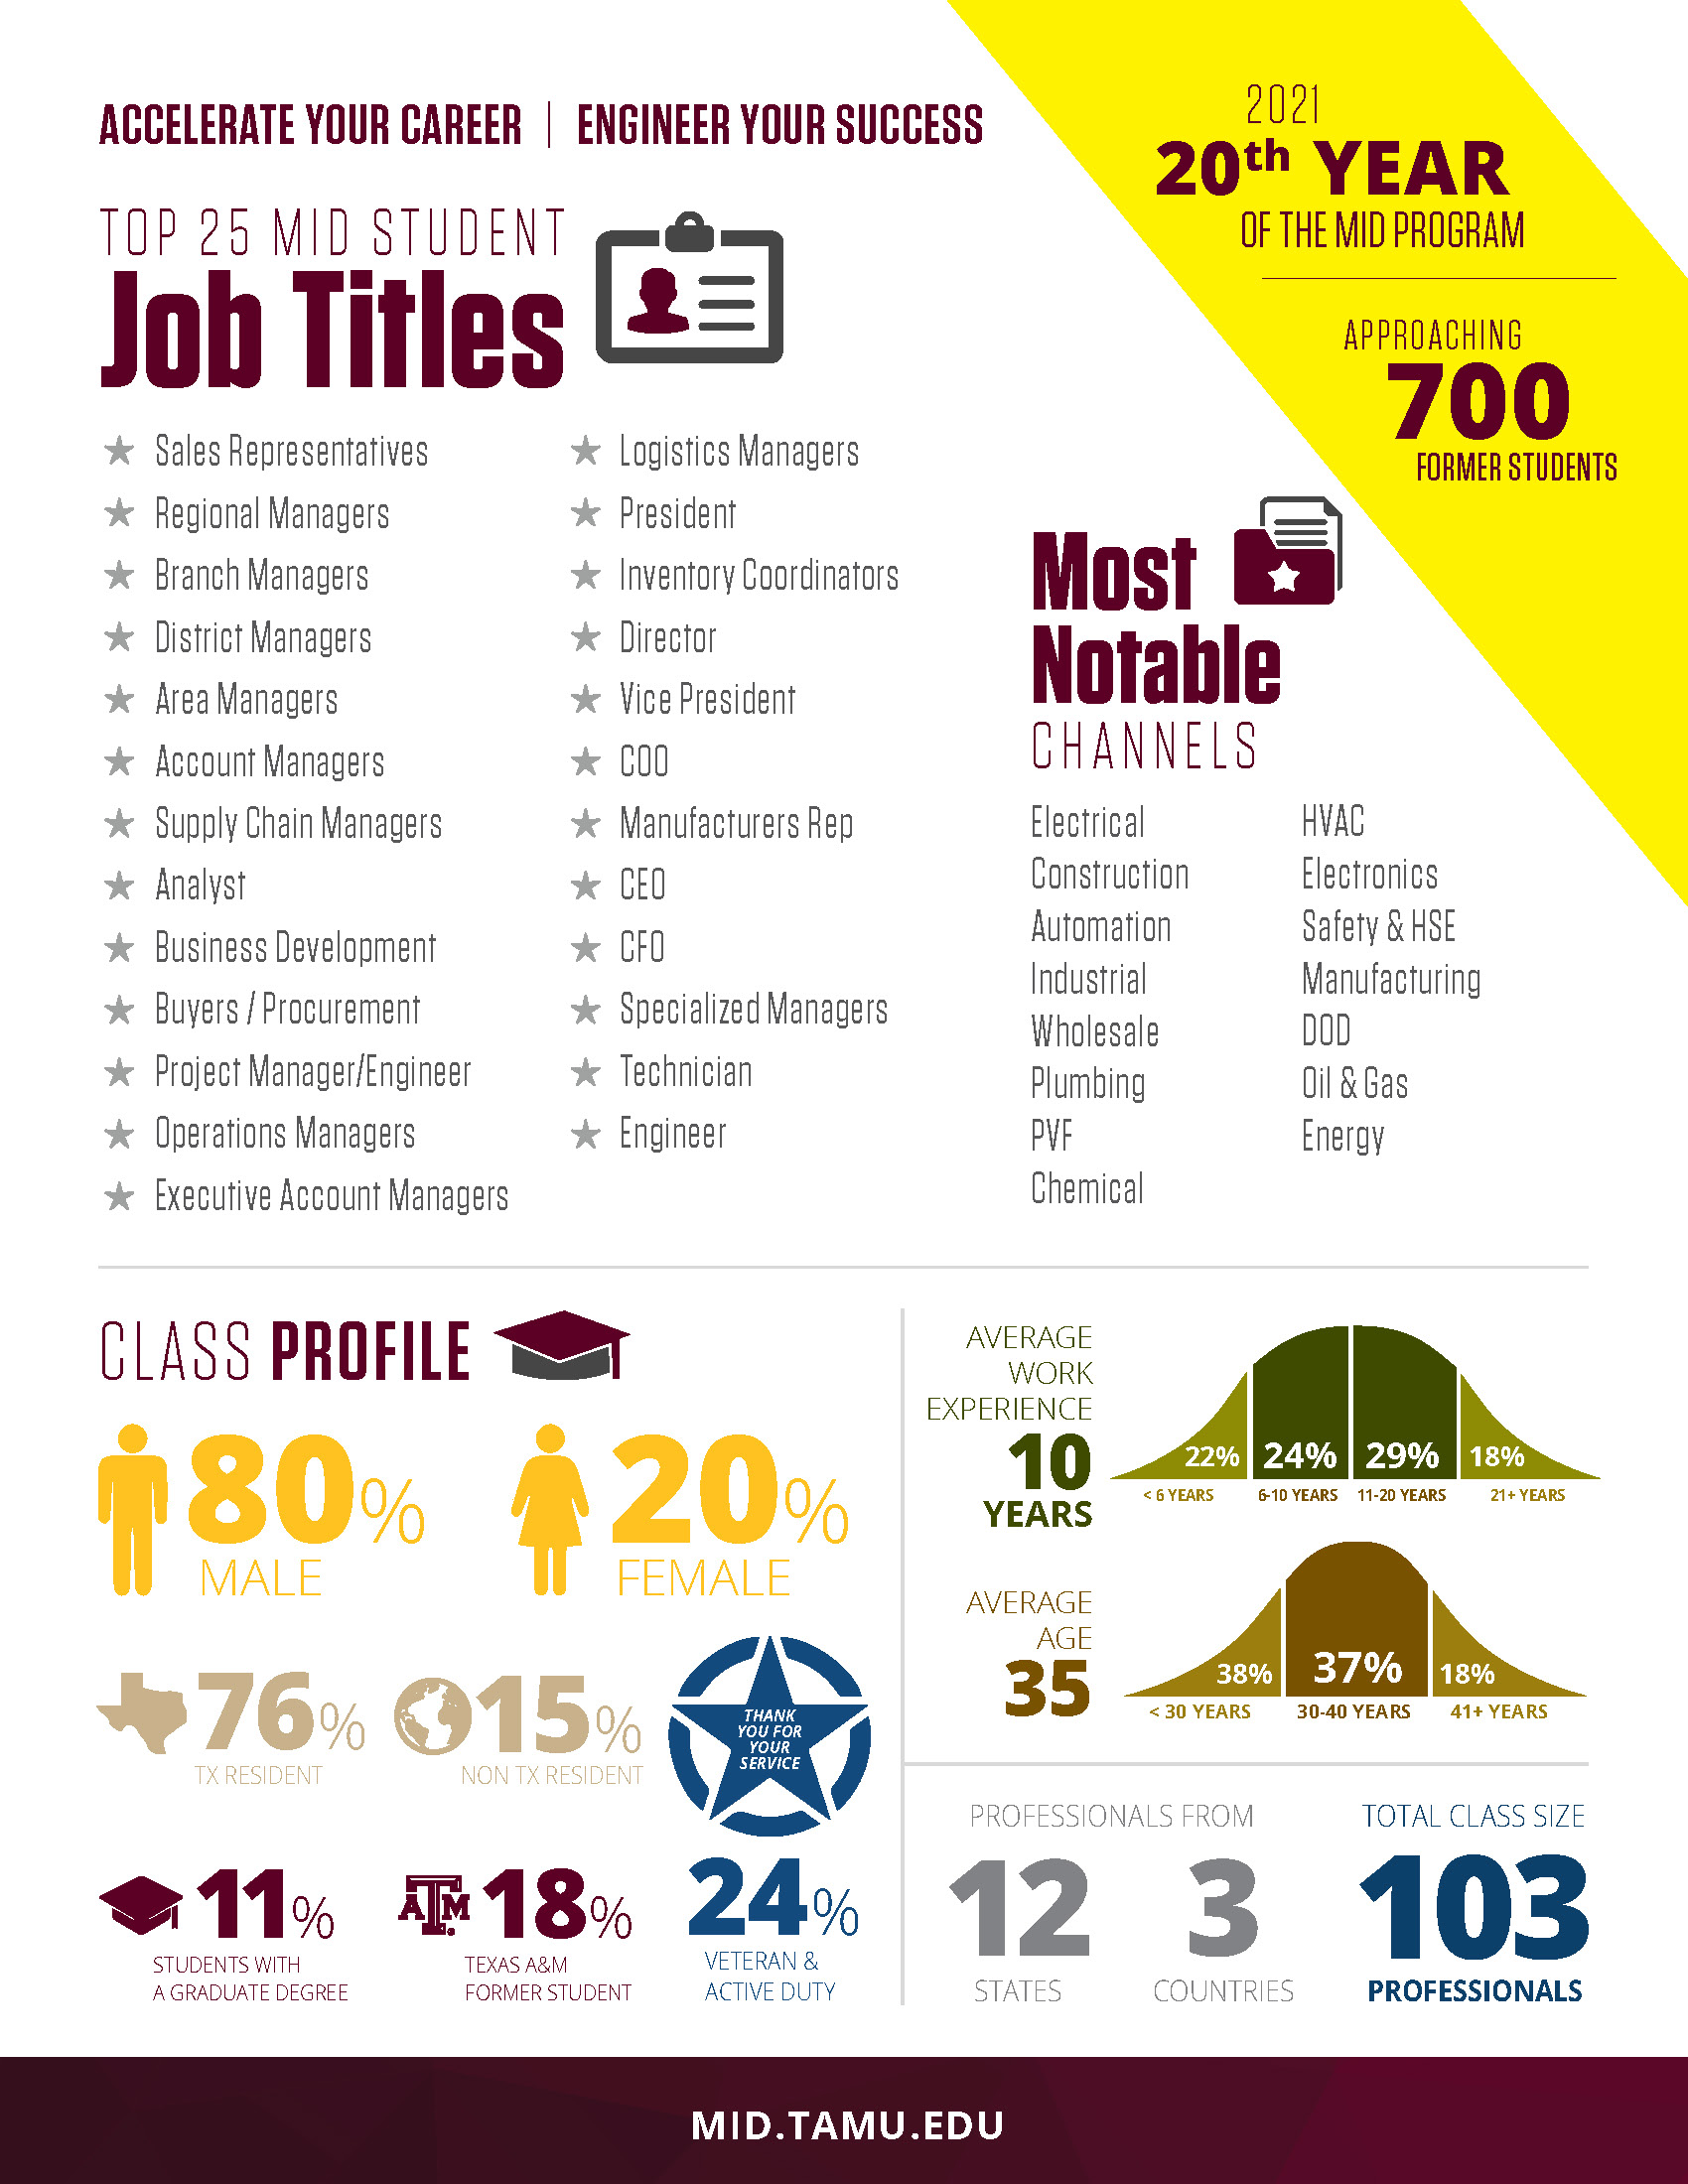 MID Job Titles and Class Demographics Infographic